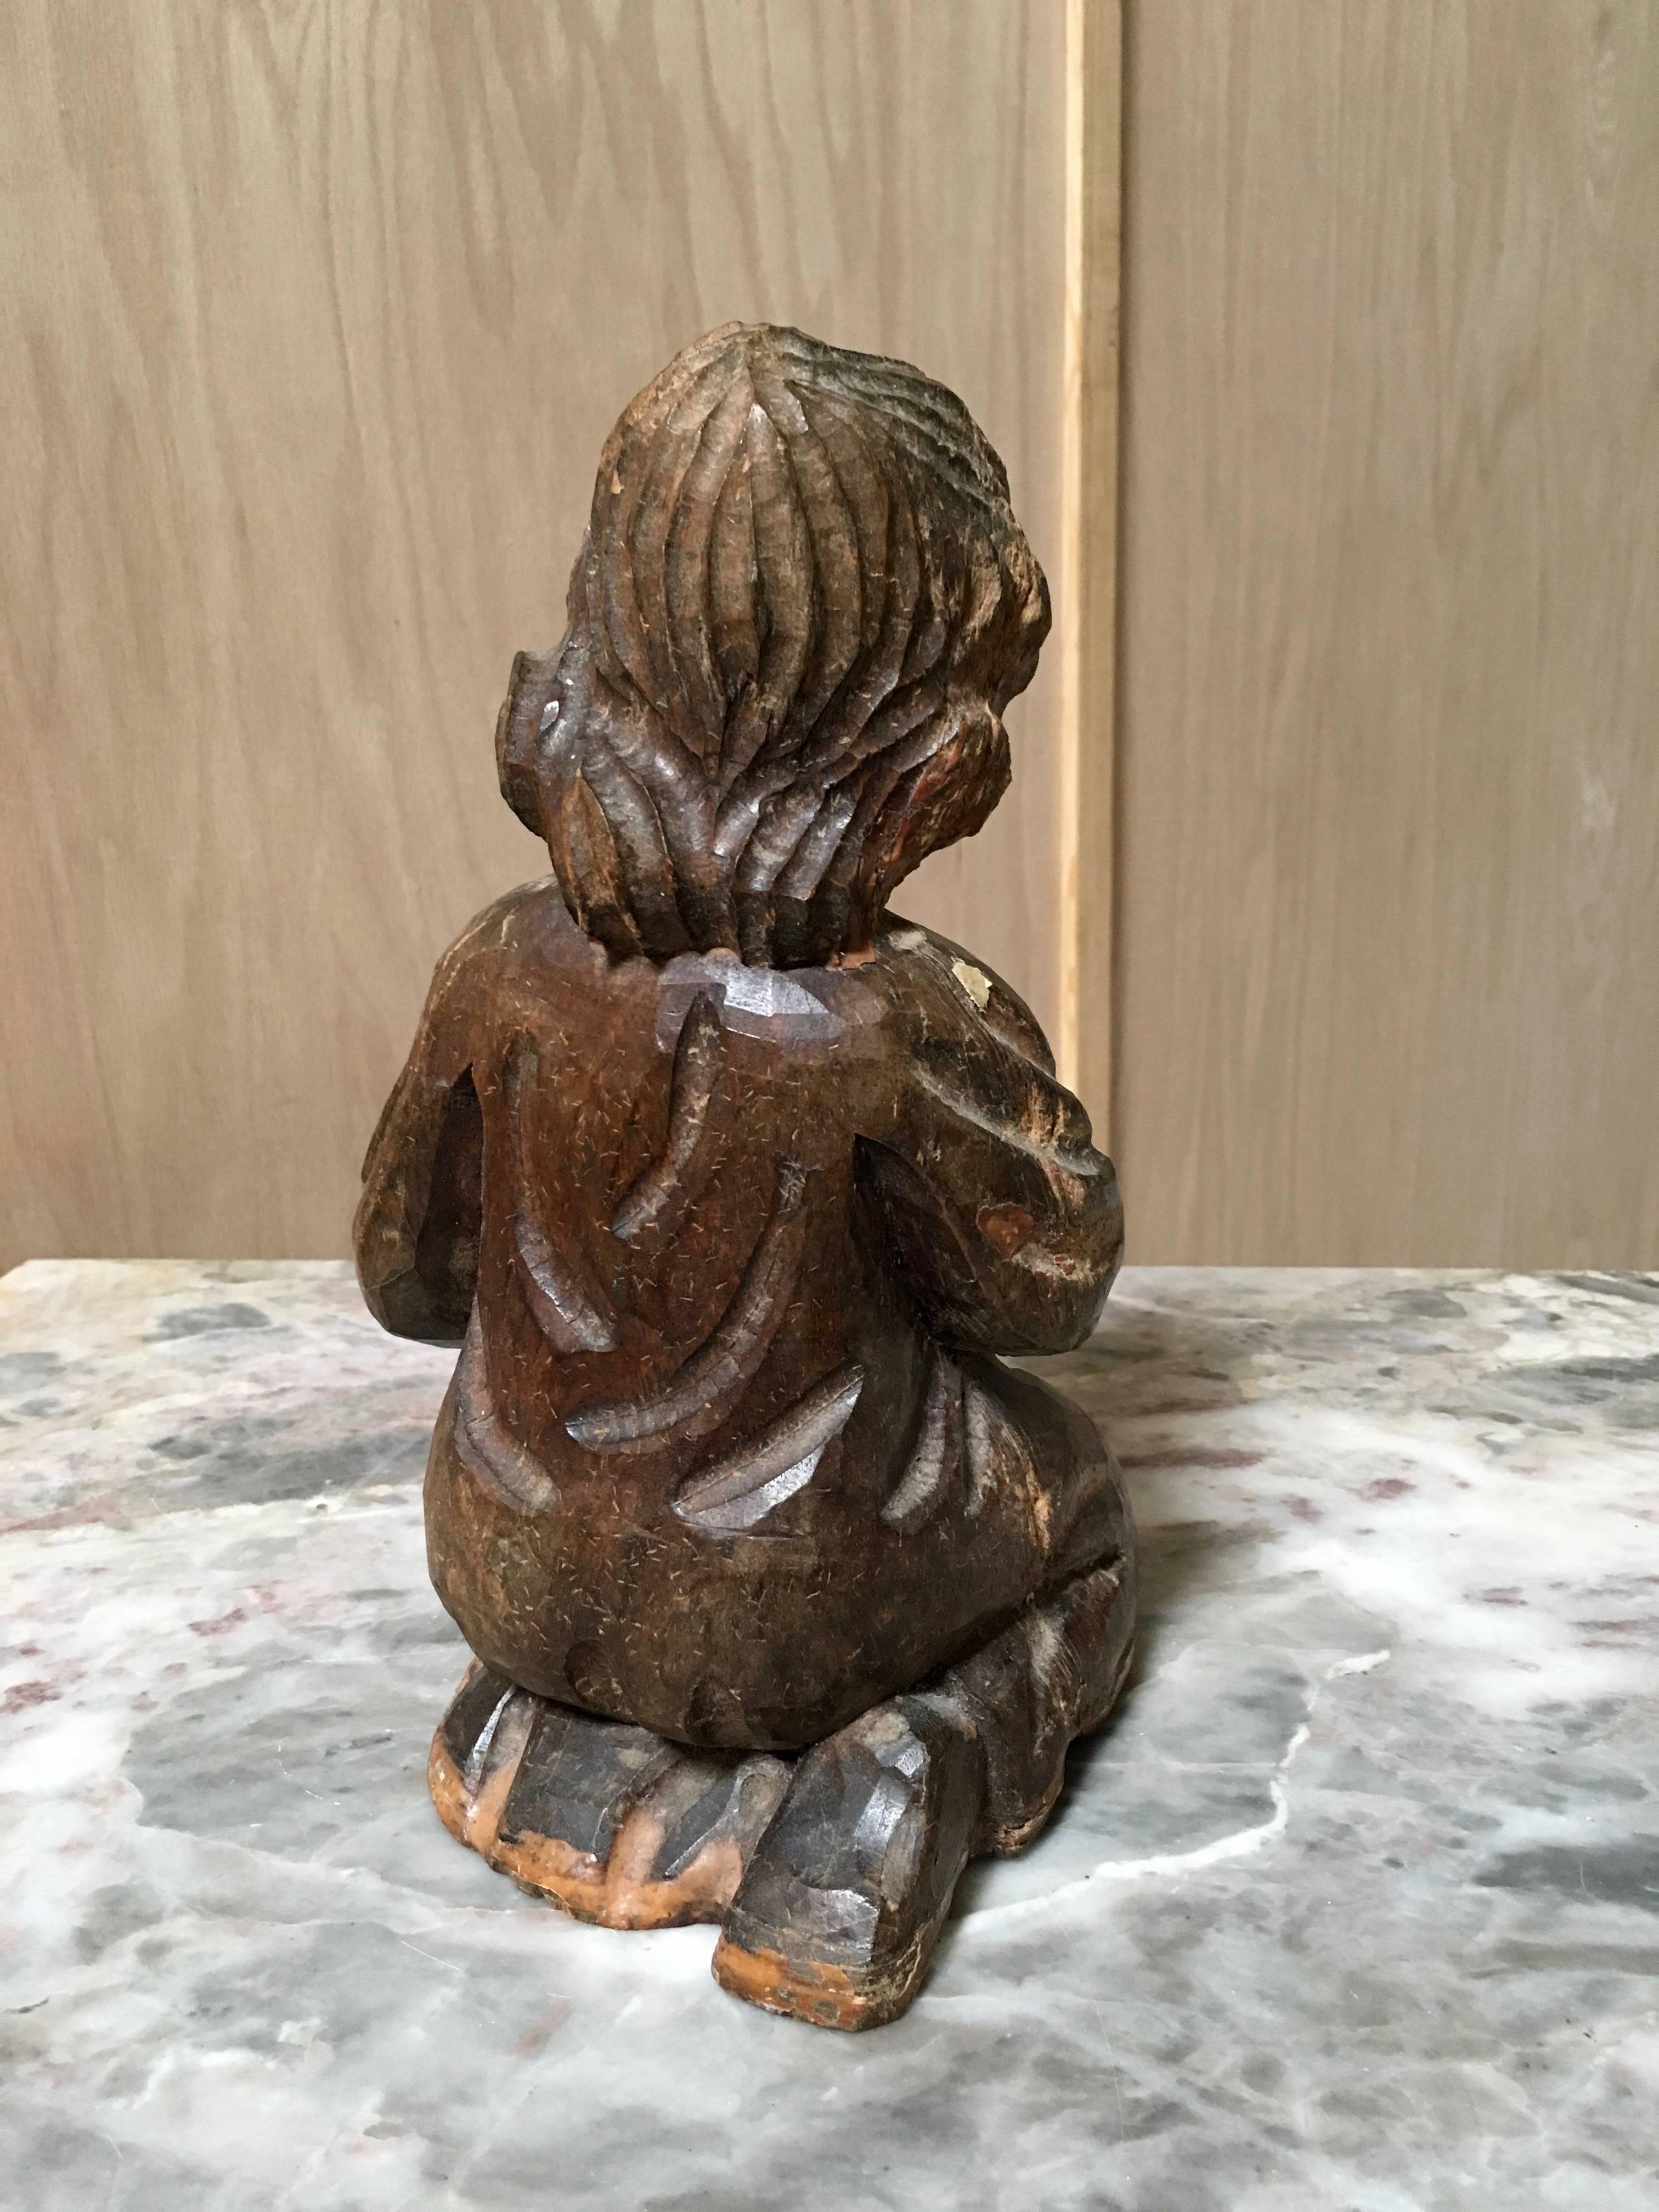 Antique 19th century hand-carved statue of boy playing violin.